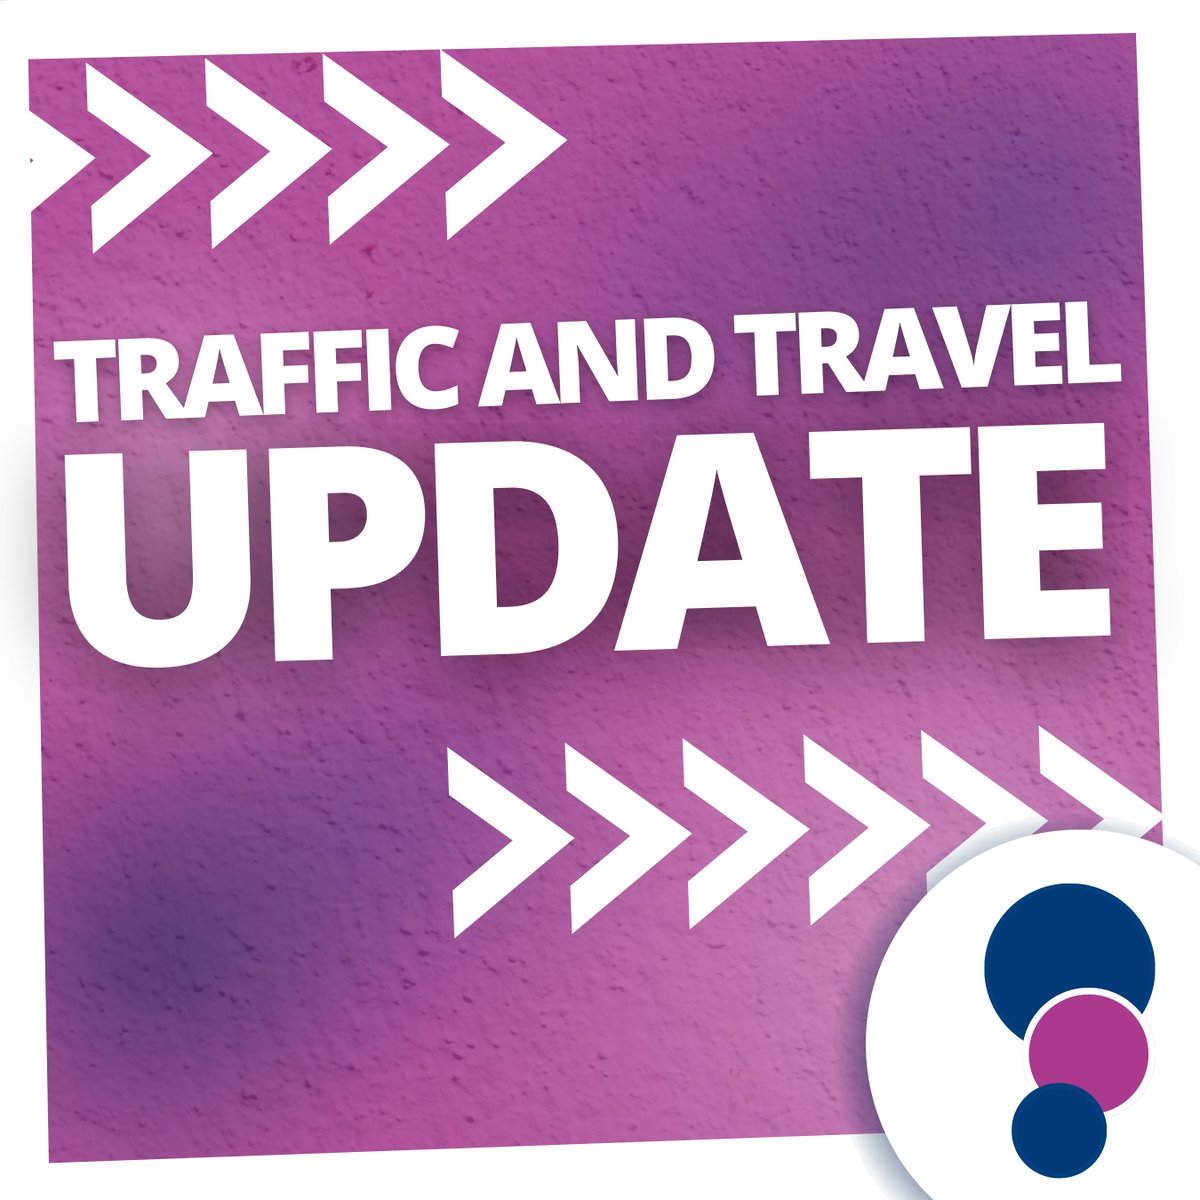 M5 ALERT; There are now reports that there has been an accident on the southbound sliproad, coming off the M5 at Junction 25. Please approach with care.